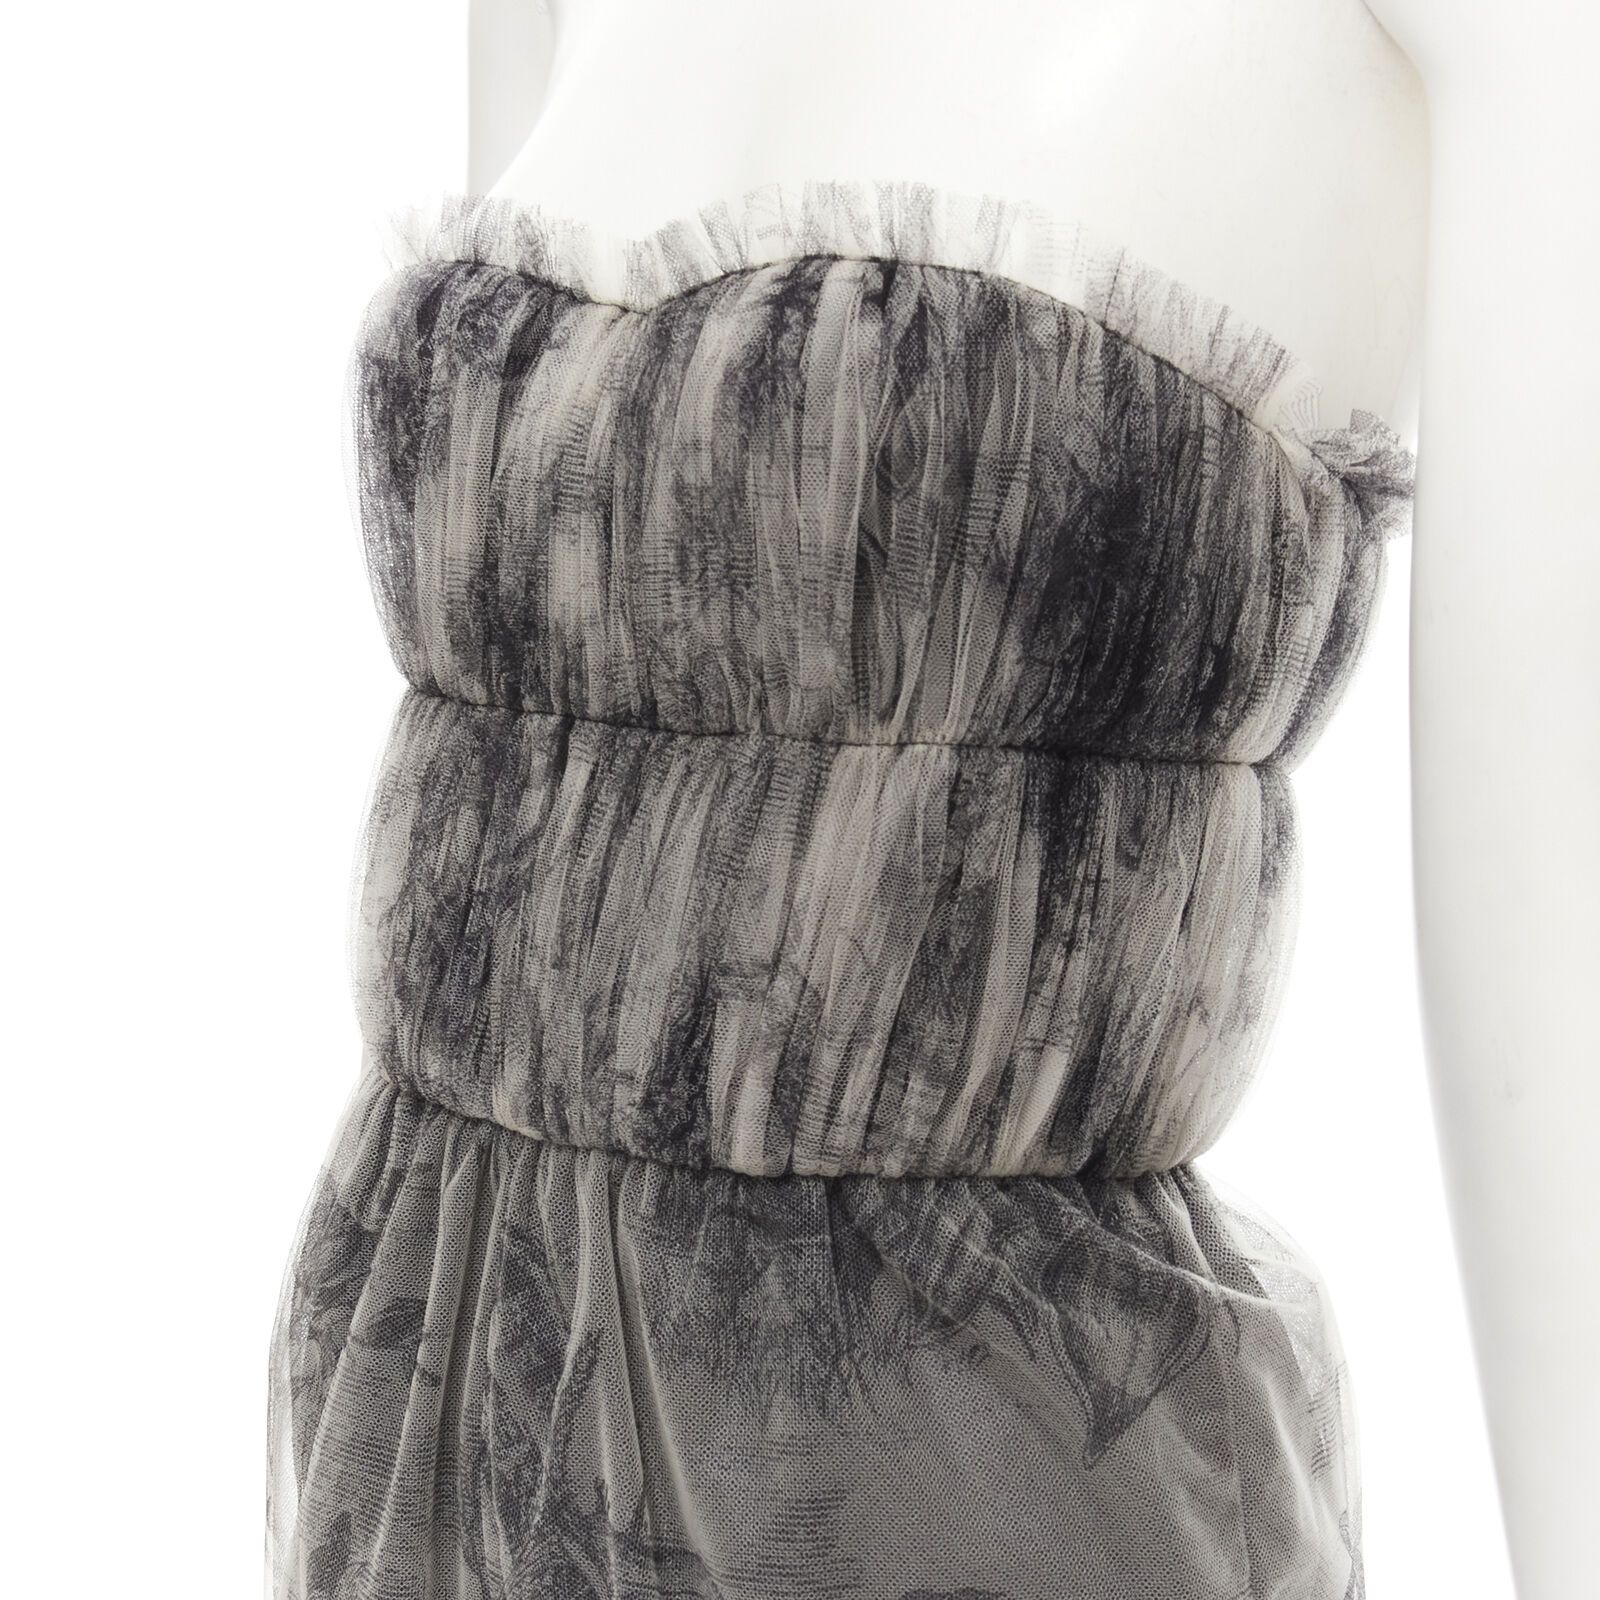 Dior new CHRISTIAN DIOR Fantaisie Dioriviera tulle gathered pleated romper FR34 XS Size 26" / US 2 / IT 38 - 2 Preview